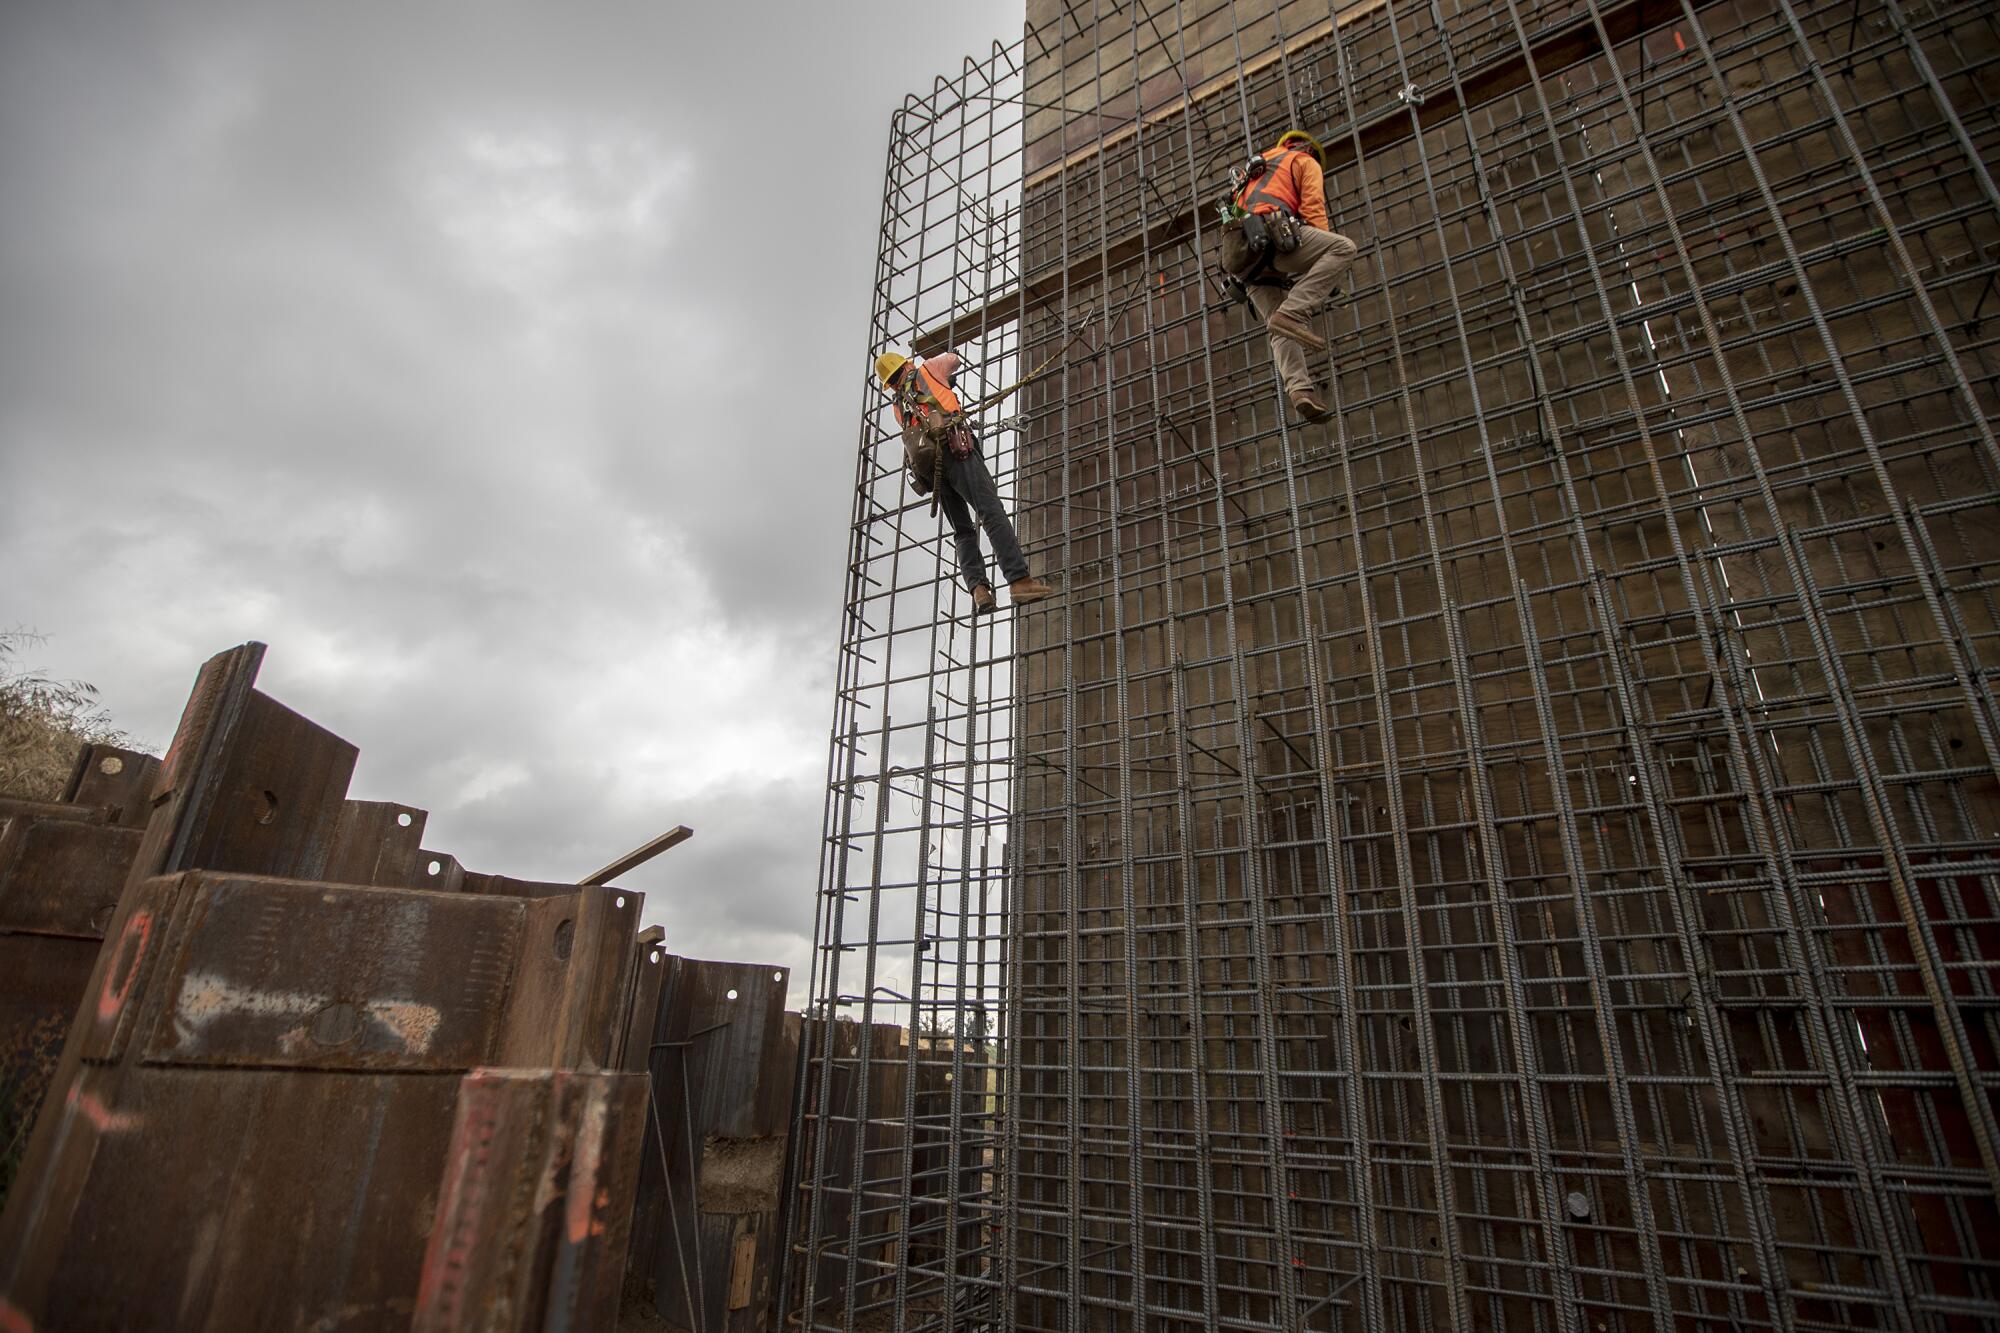 Two workers high up on a large section of rebar